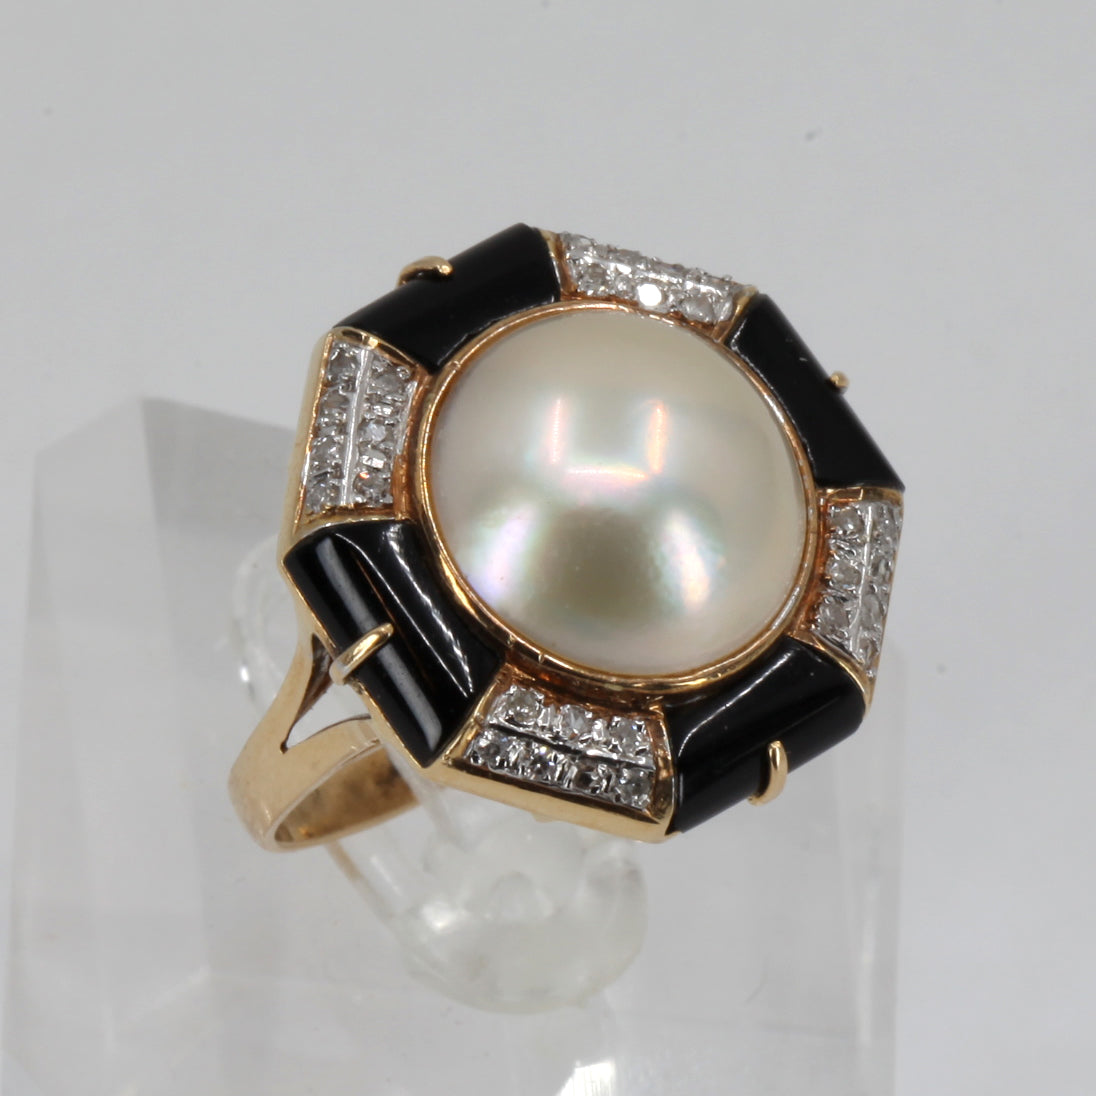 14K Solid Yellow Gold Diamond Mabe Pearl Onyx Ring 5.8 Grams